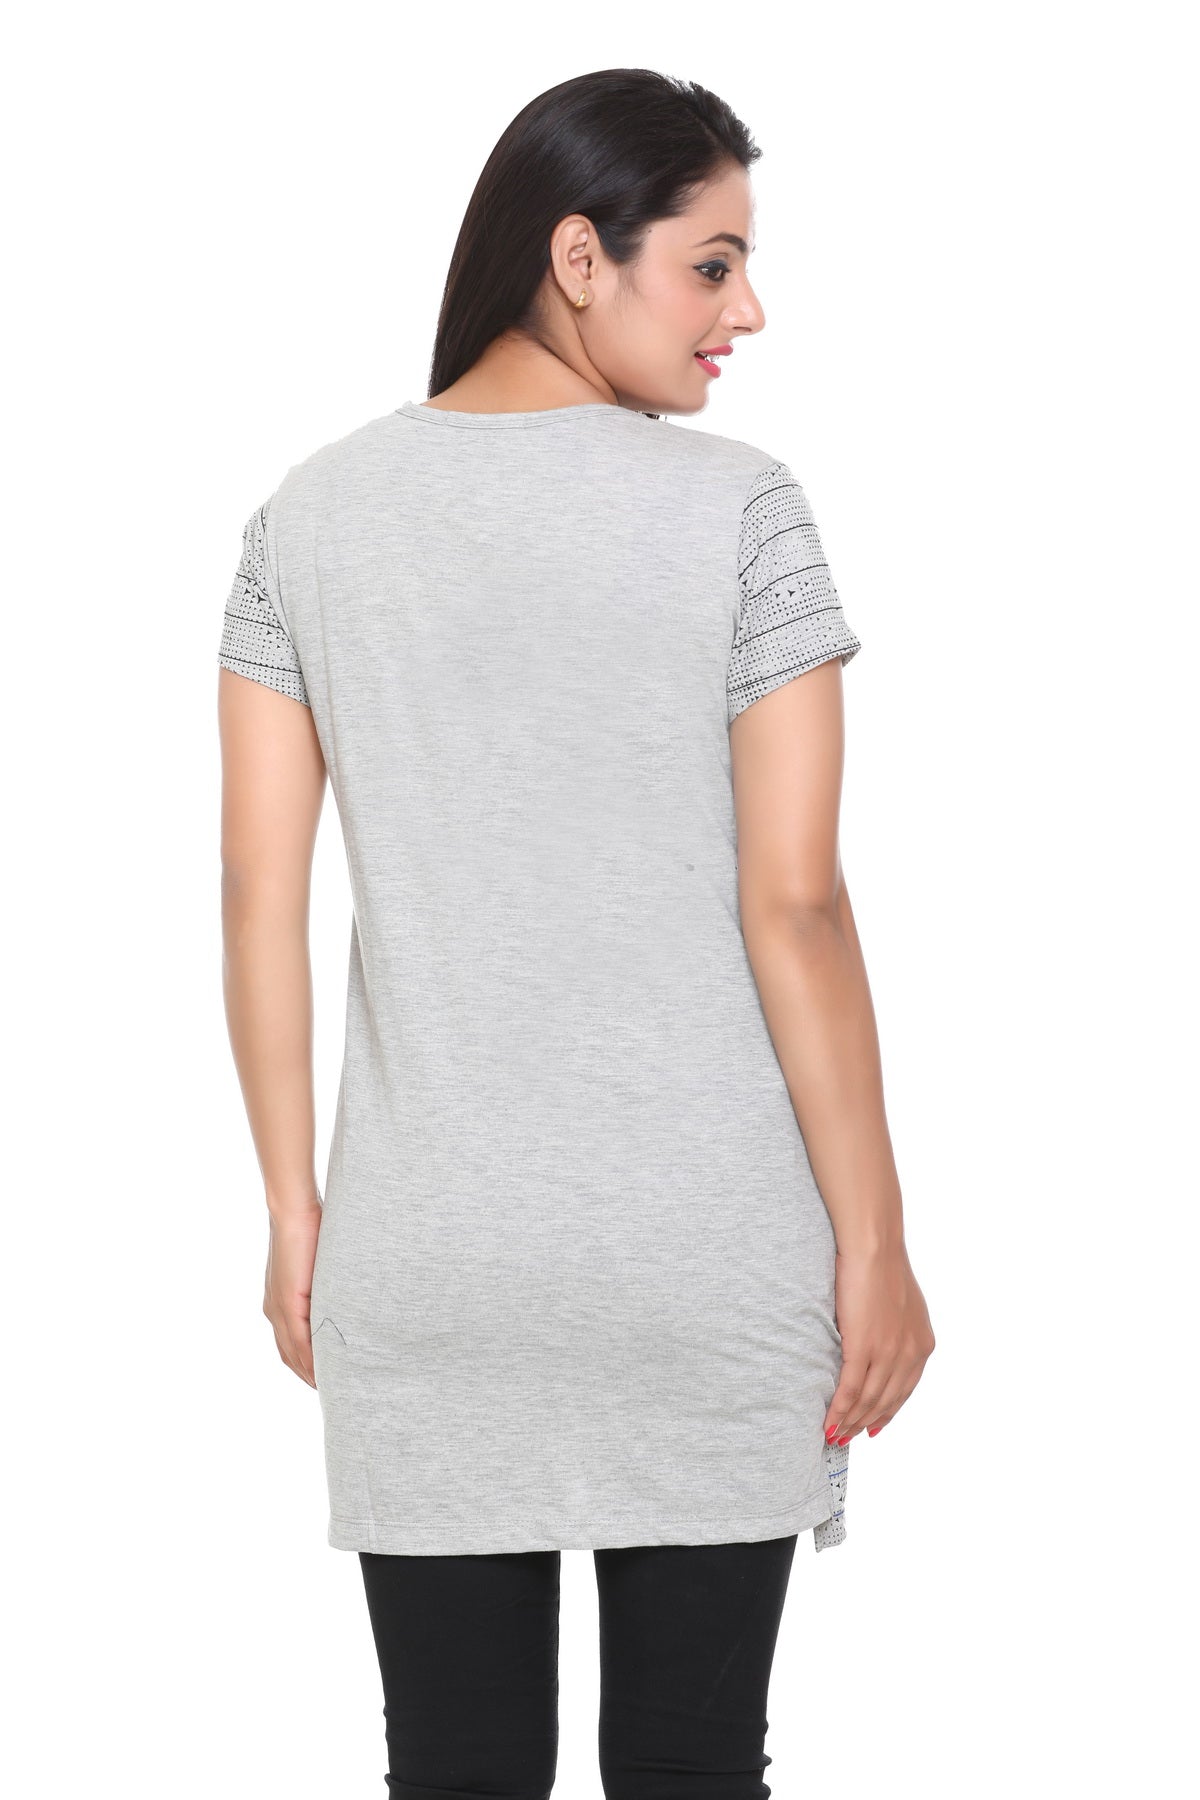 Cotton Printed Long T-shirts For Women Half Sleeve - Grey